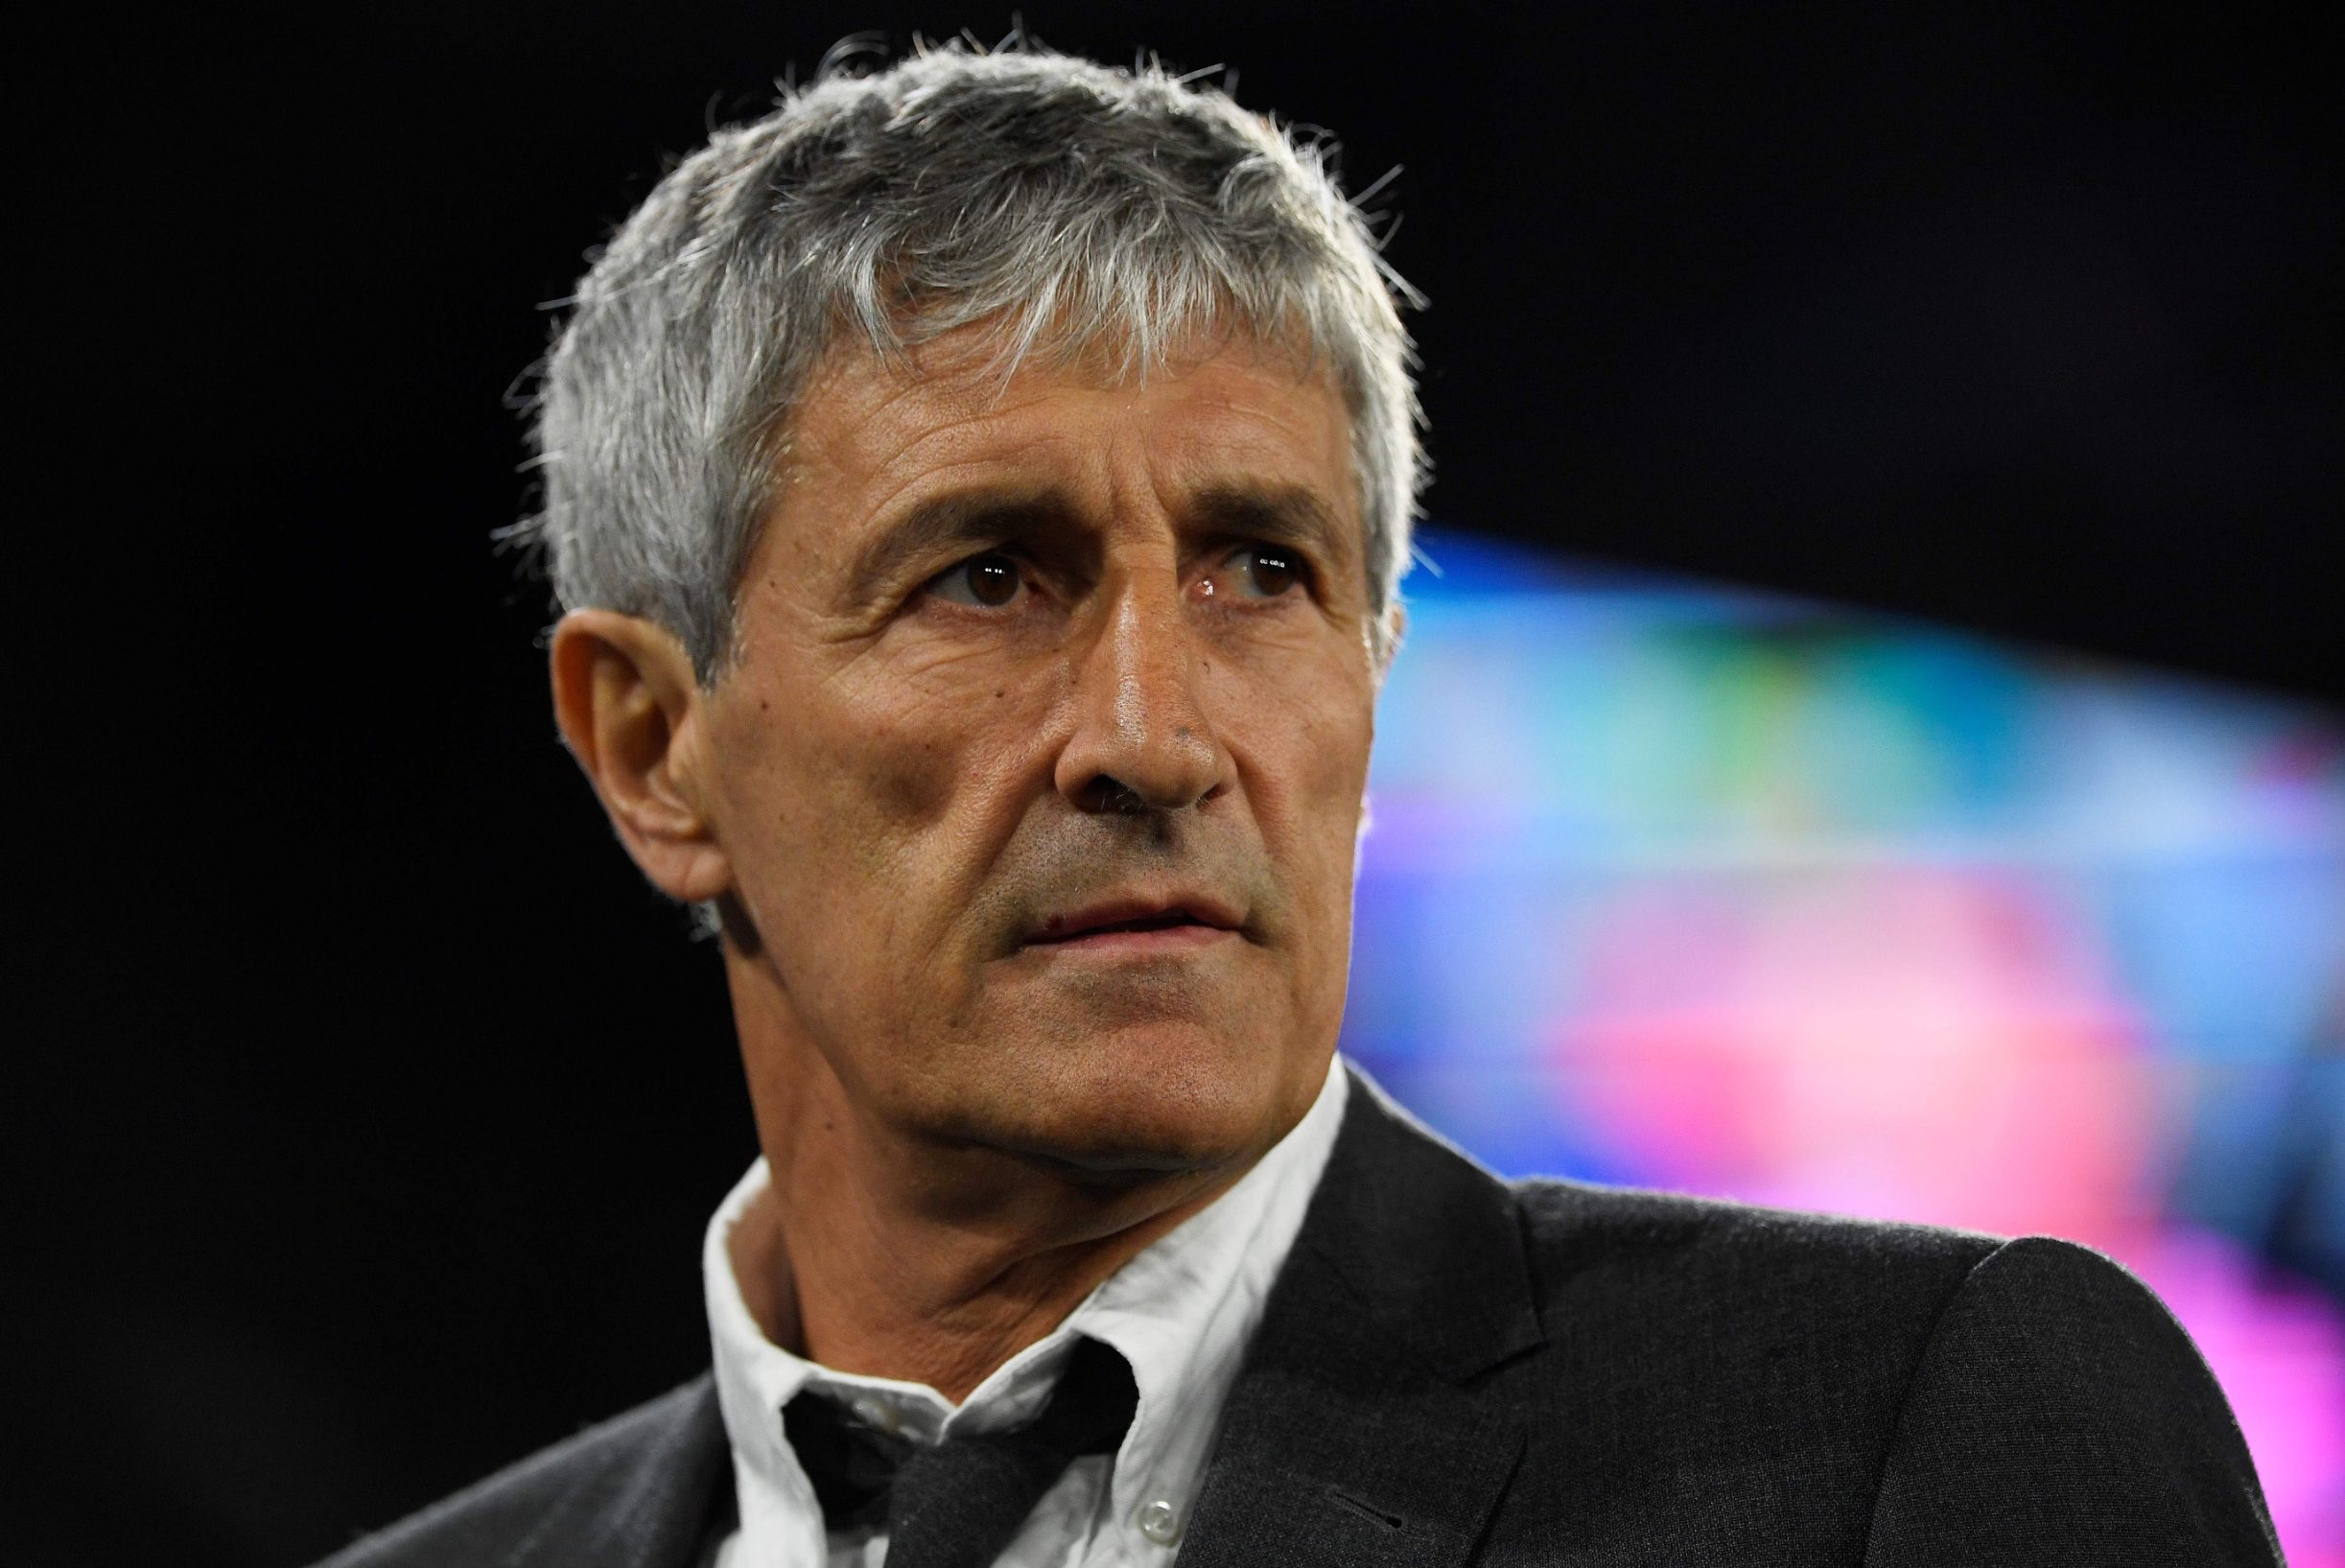 Barcelona's Spanish head coach Quique Setien looks on prior to the  UEFA Champions League round of 16 first-leg football match between SSC Napoli and FC Barcelona at the San Paolo Stadium in Naples on February 25, 2020. (Photo by Filippo MONTEFORTE / AFP)